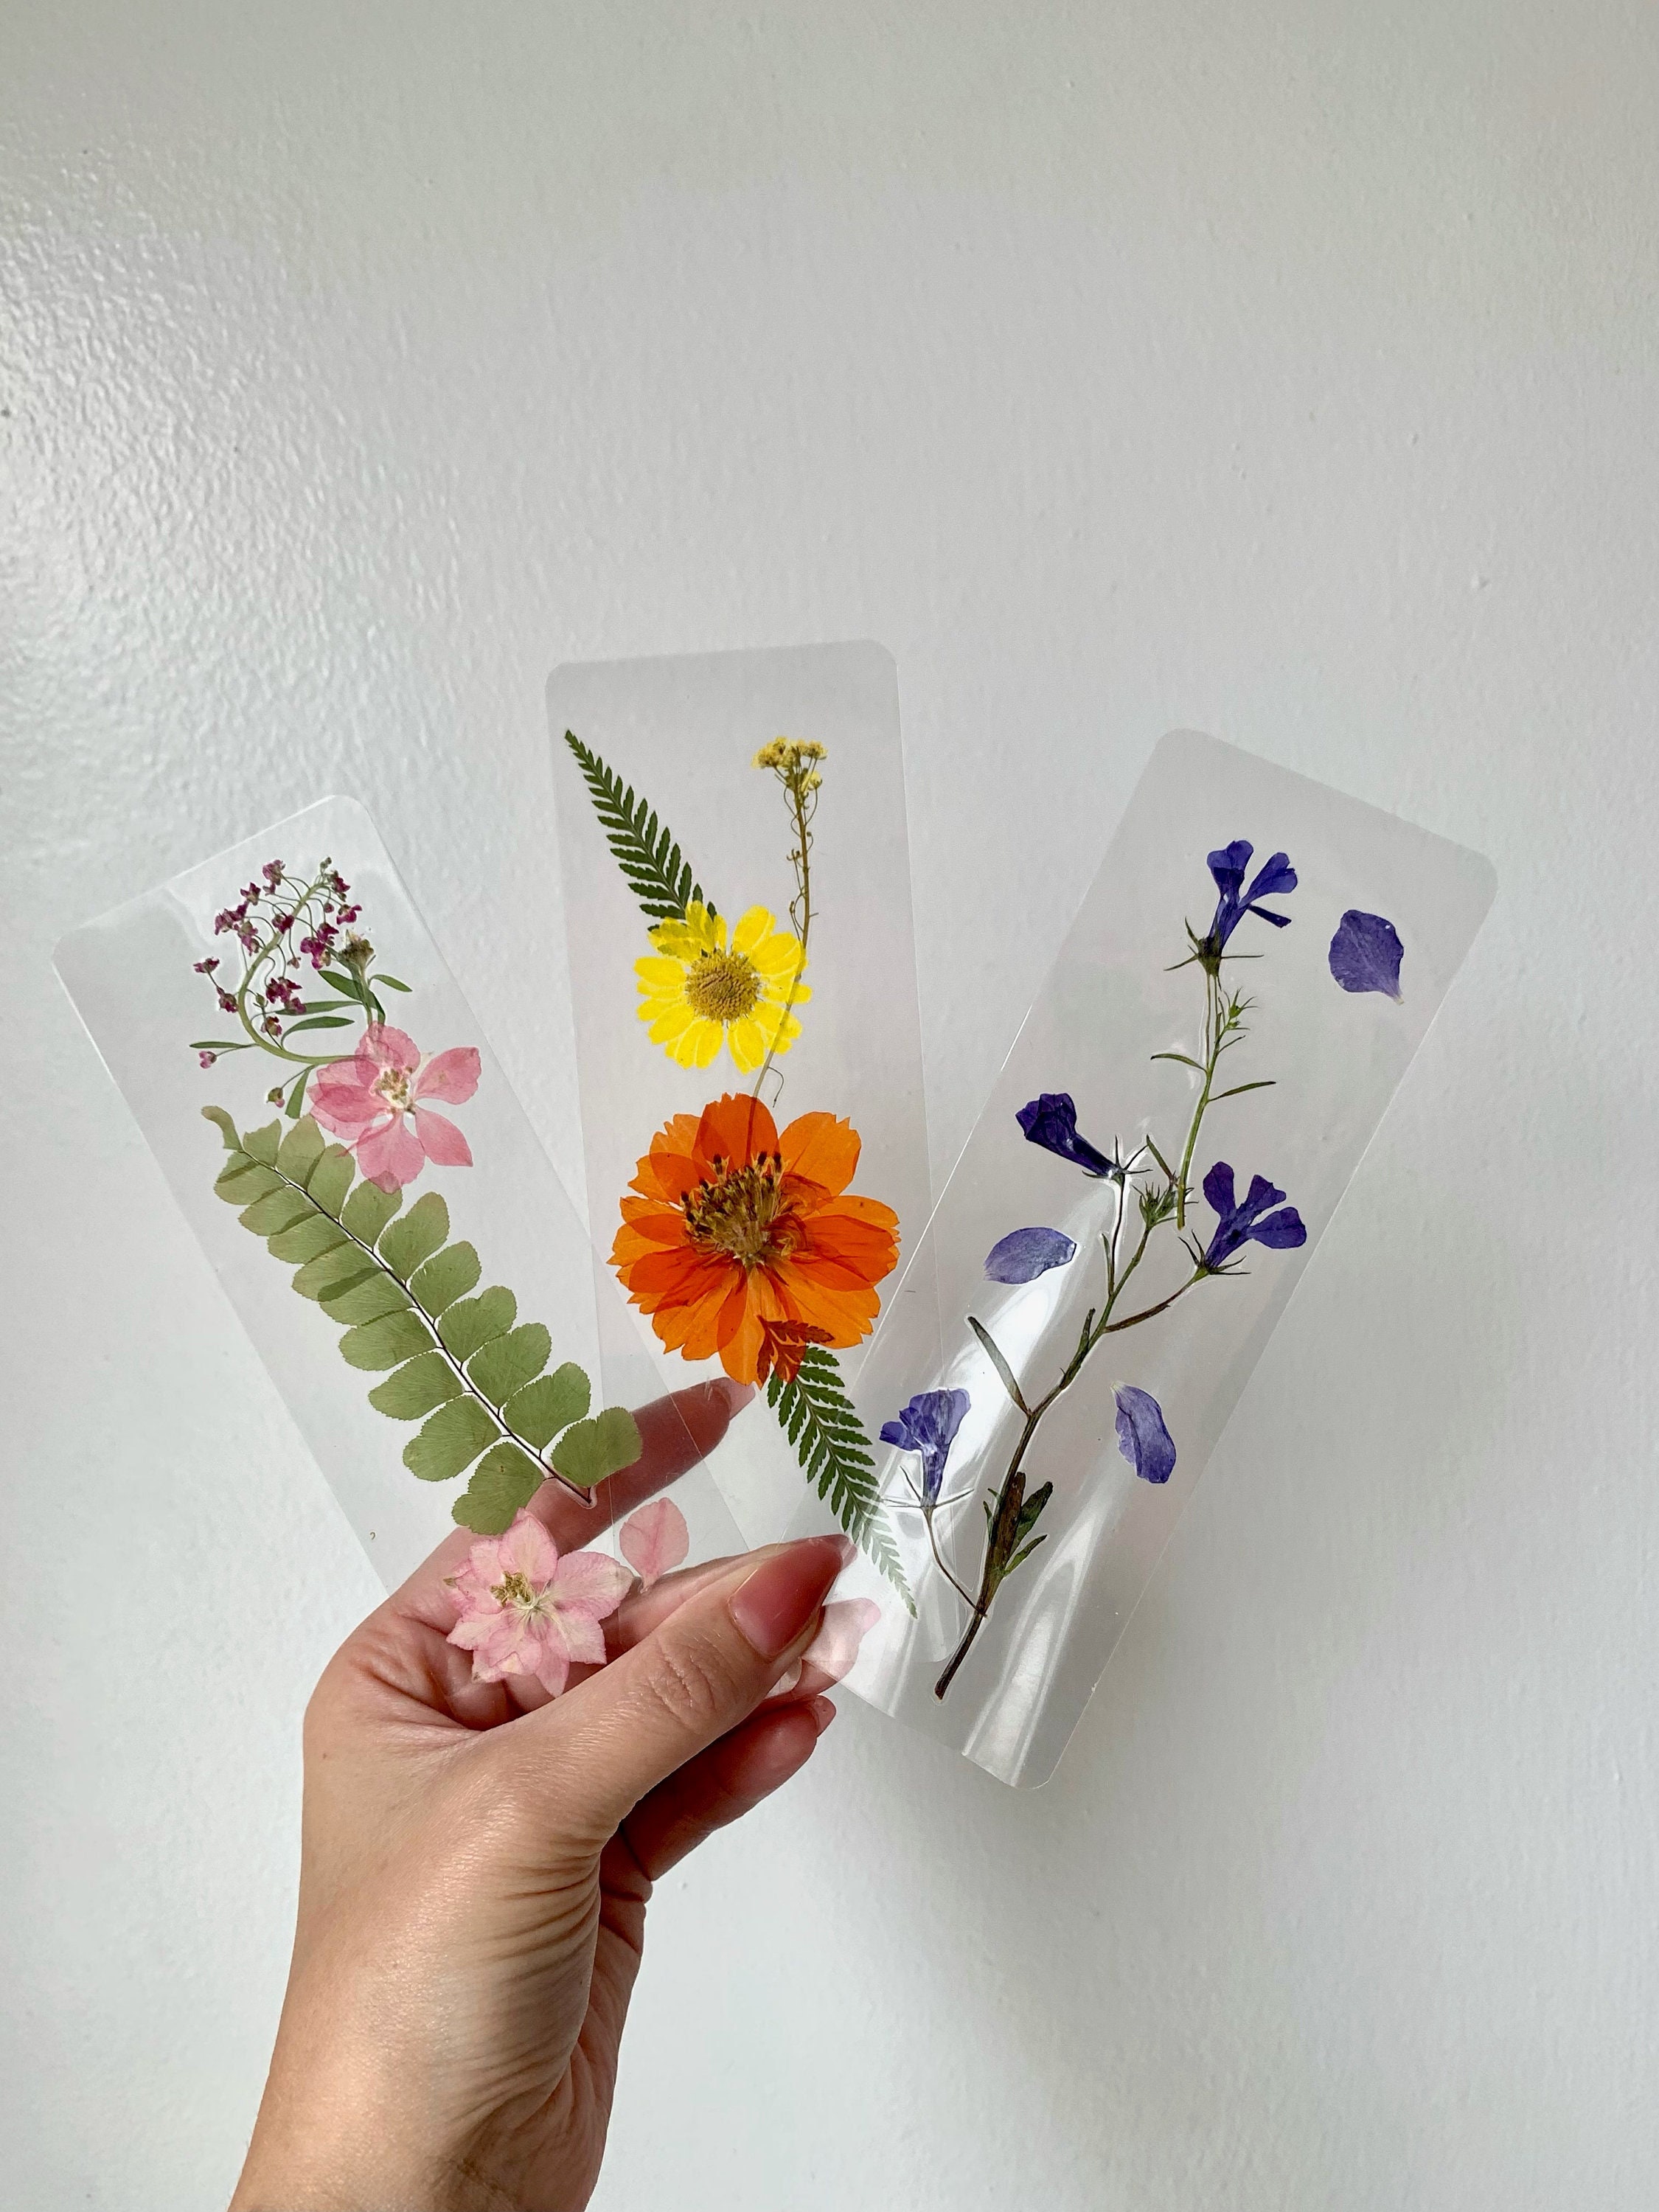 6 Pieces Resin Floral Bookmark Handmade Natural Dried Flower